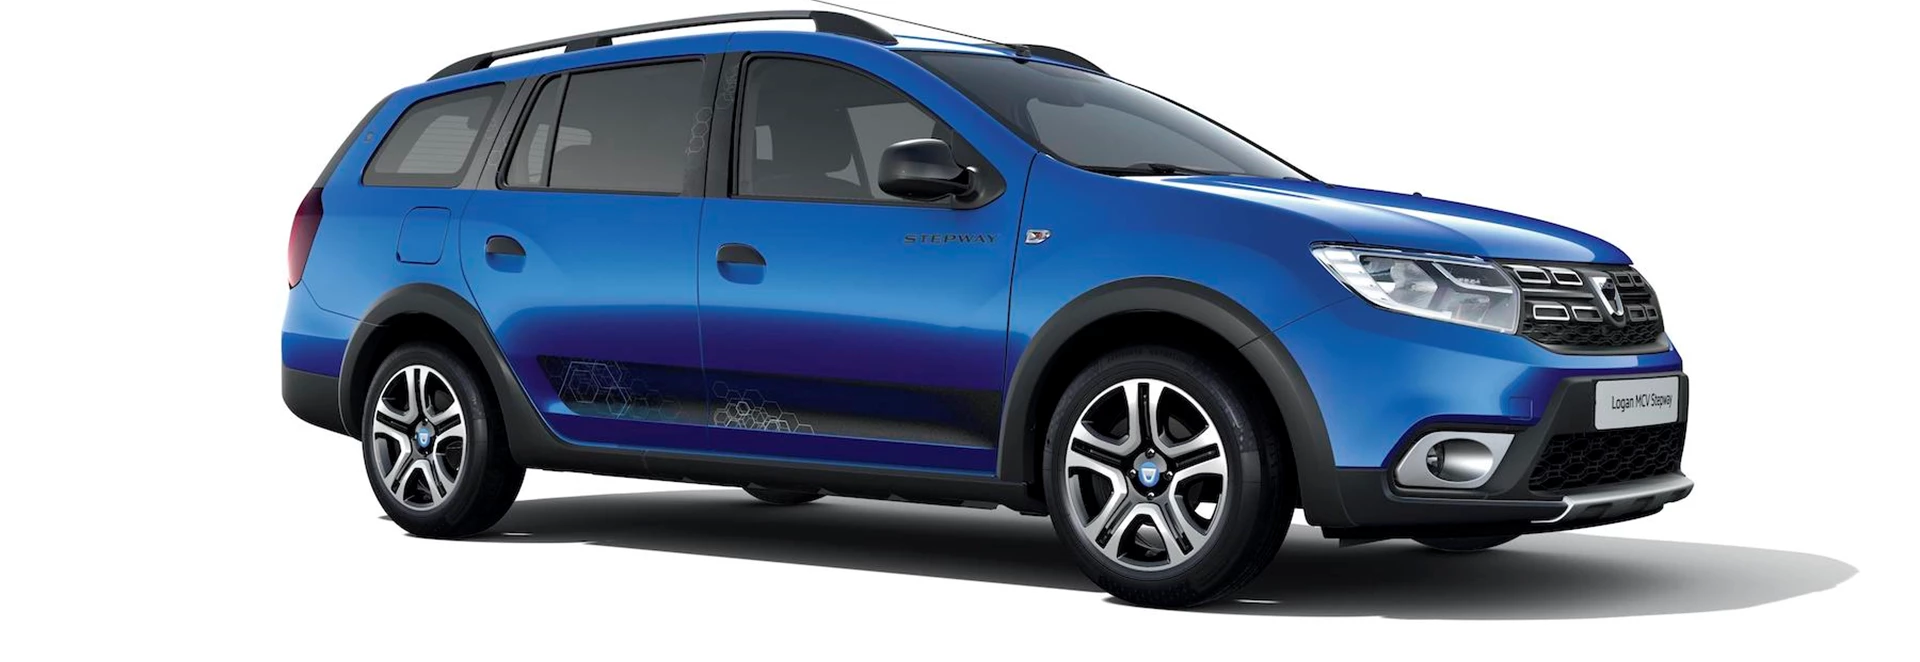 Dacia launches new ‘SE Twenty’ special edition on rugged models